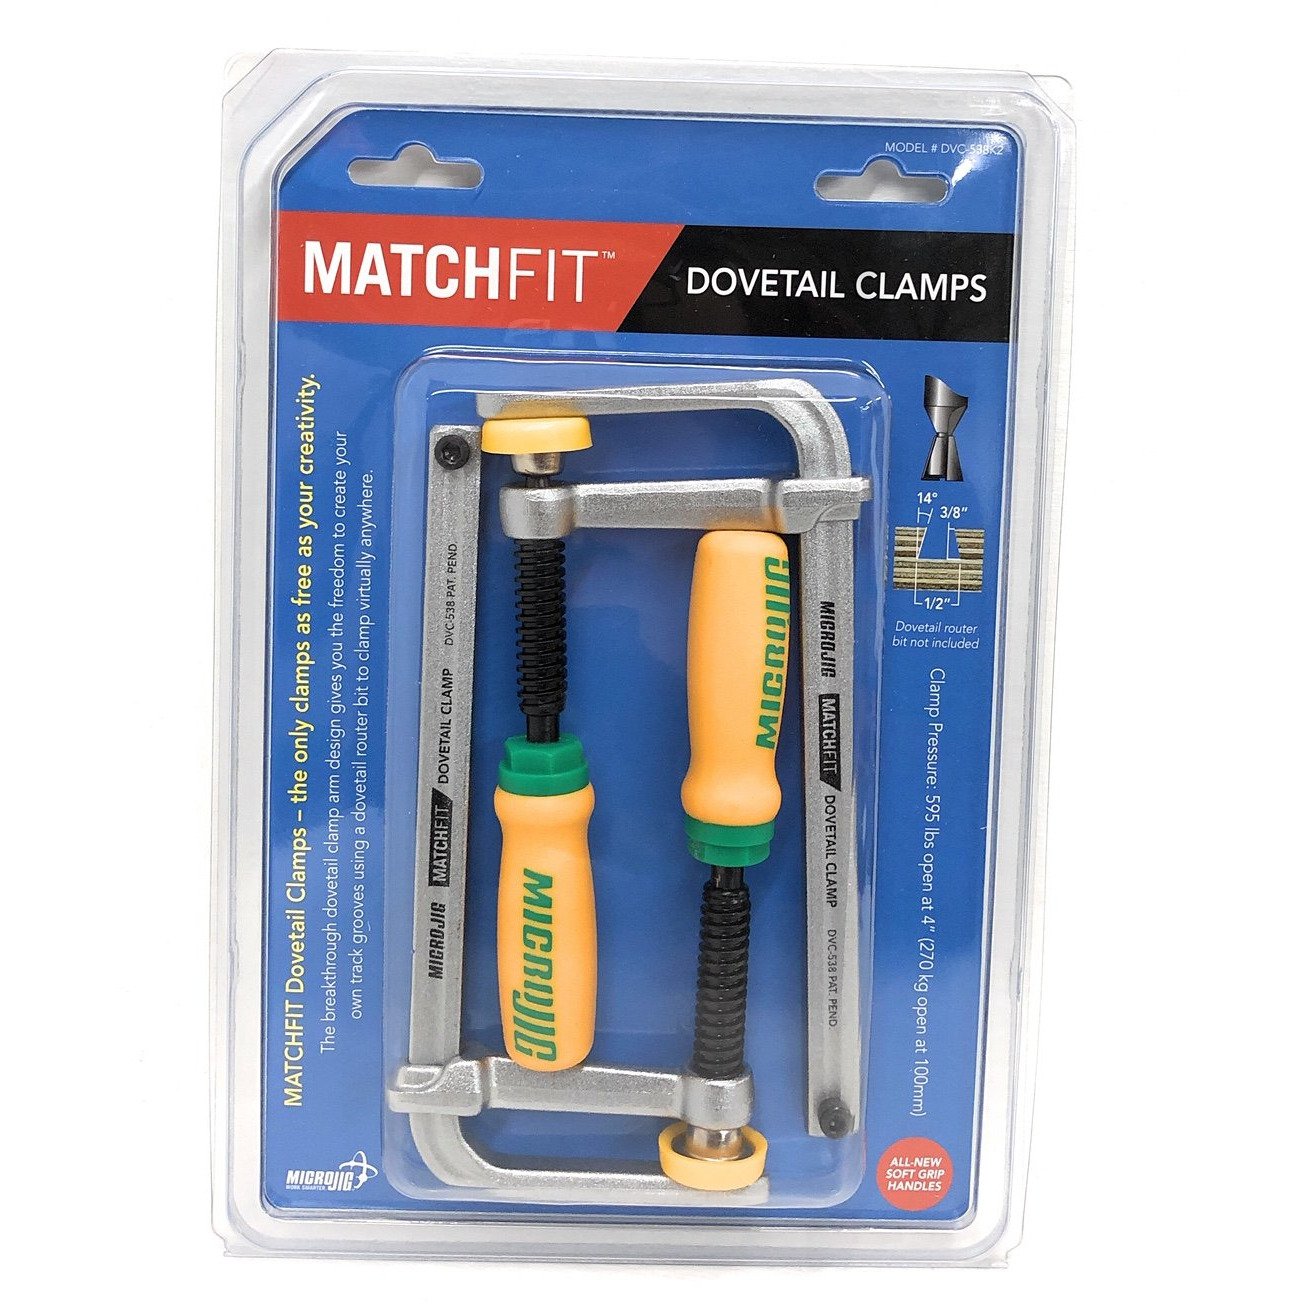 Microjig Matchfit Dovetail Clamps (2-Pack) DVC-538K2 Power Tool Services